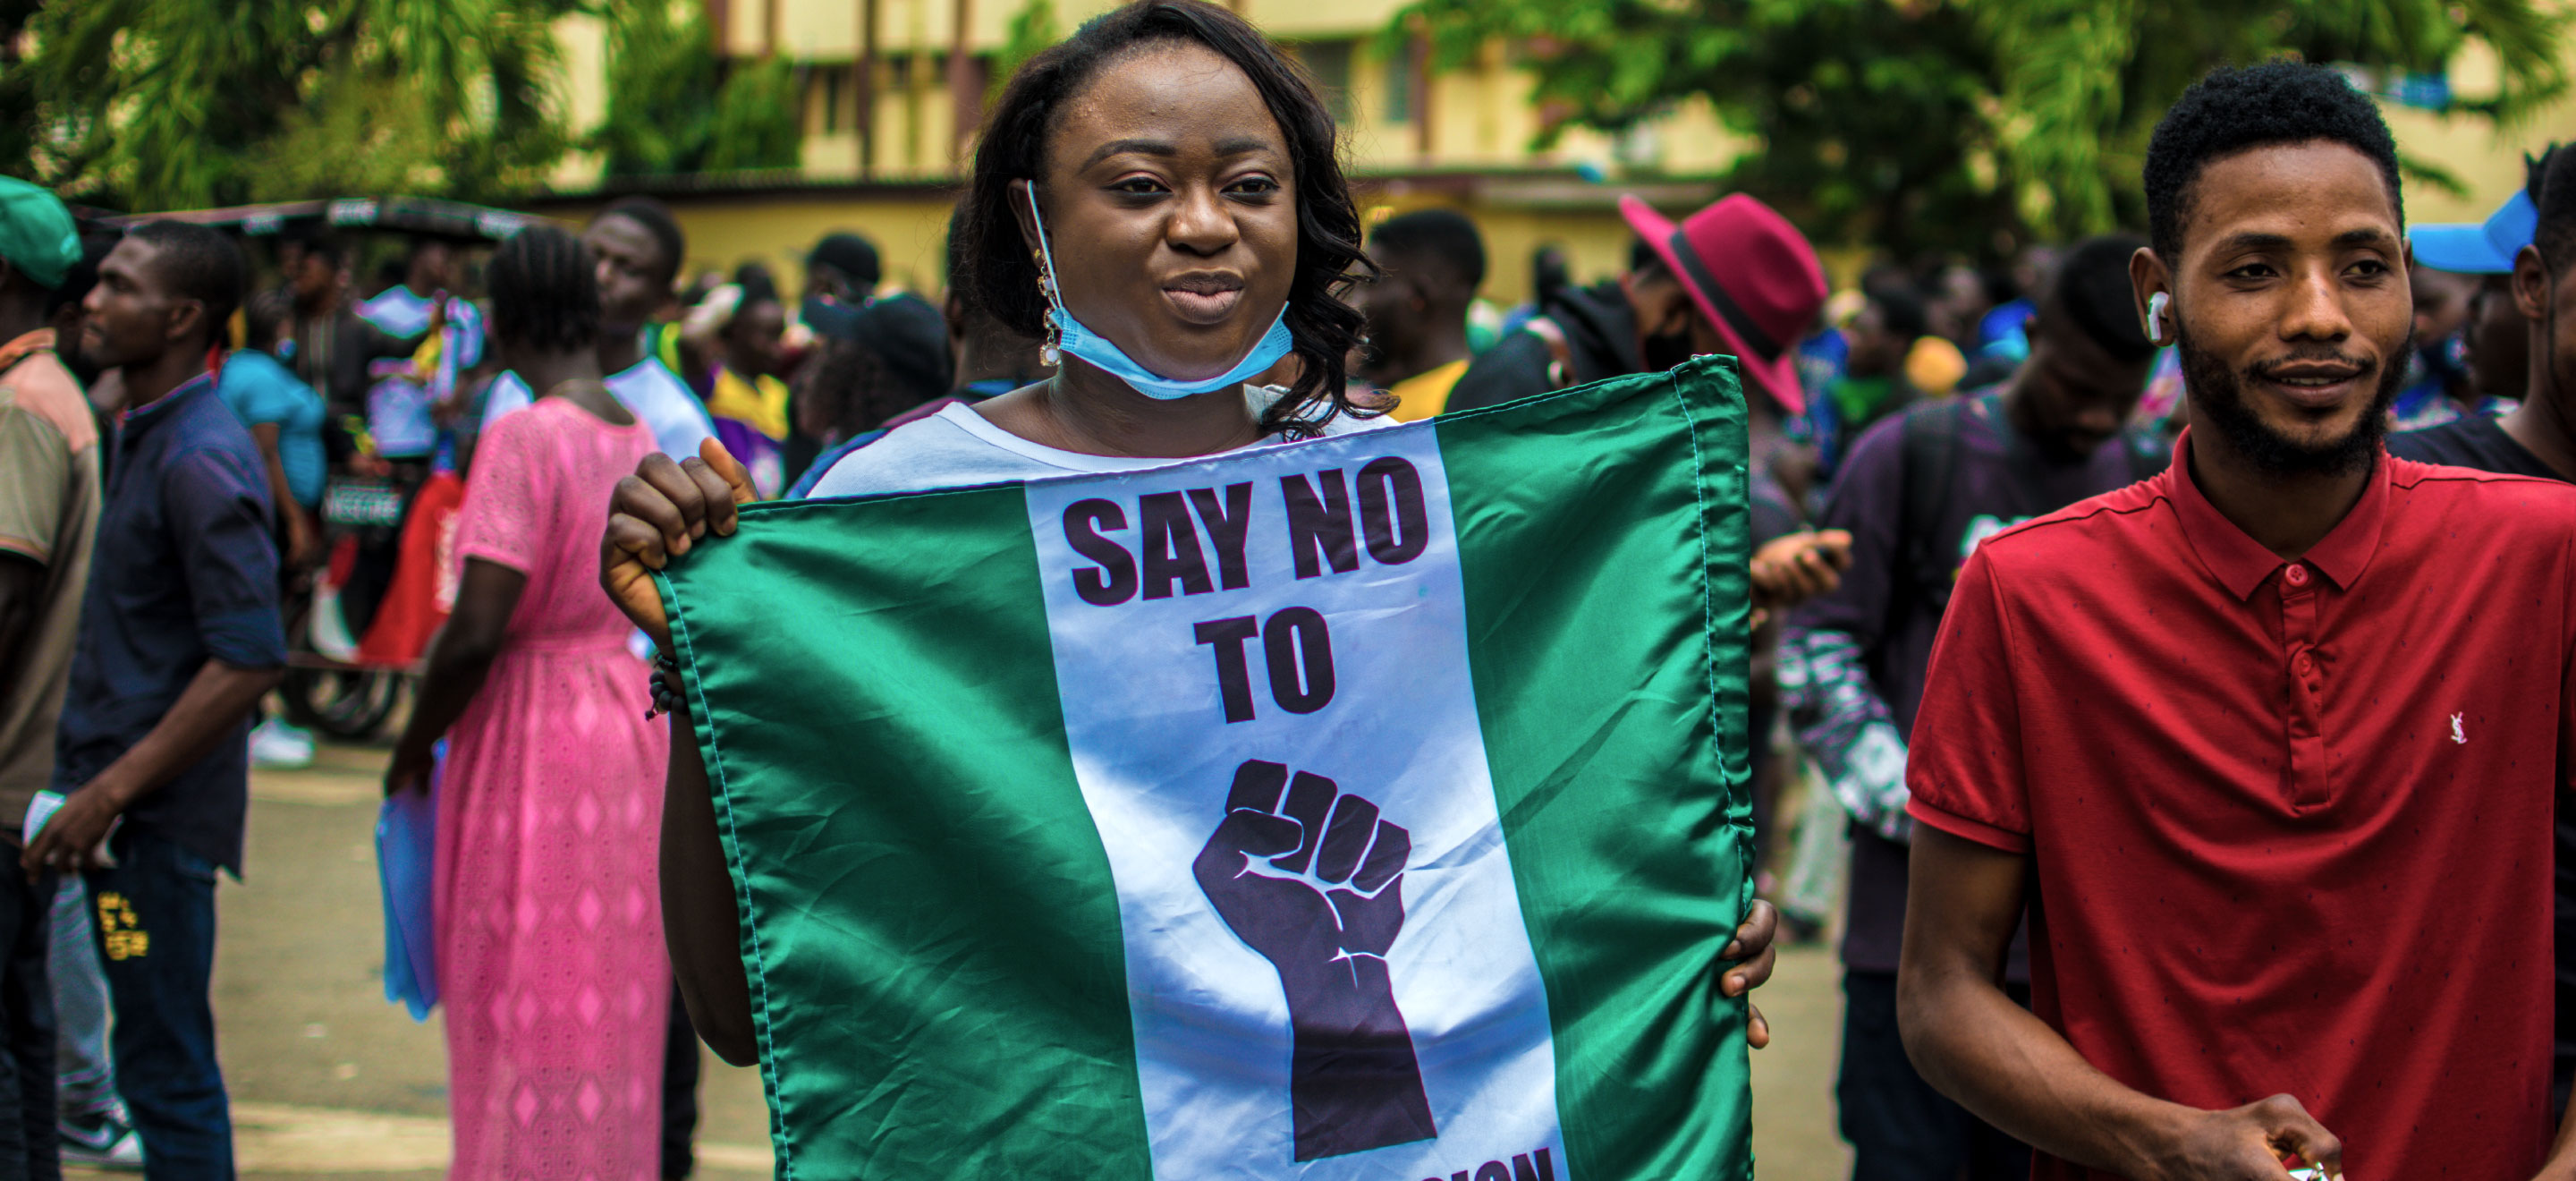 A person holding a banner during a protest in Nigeria.